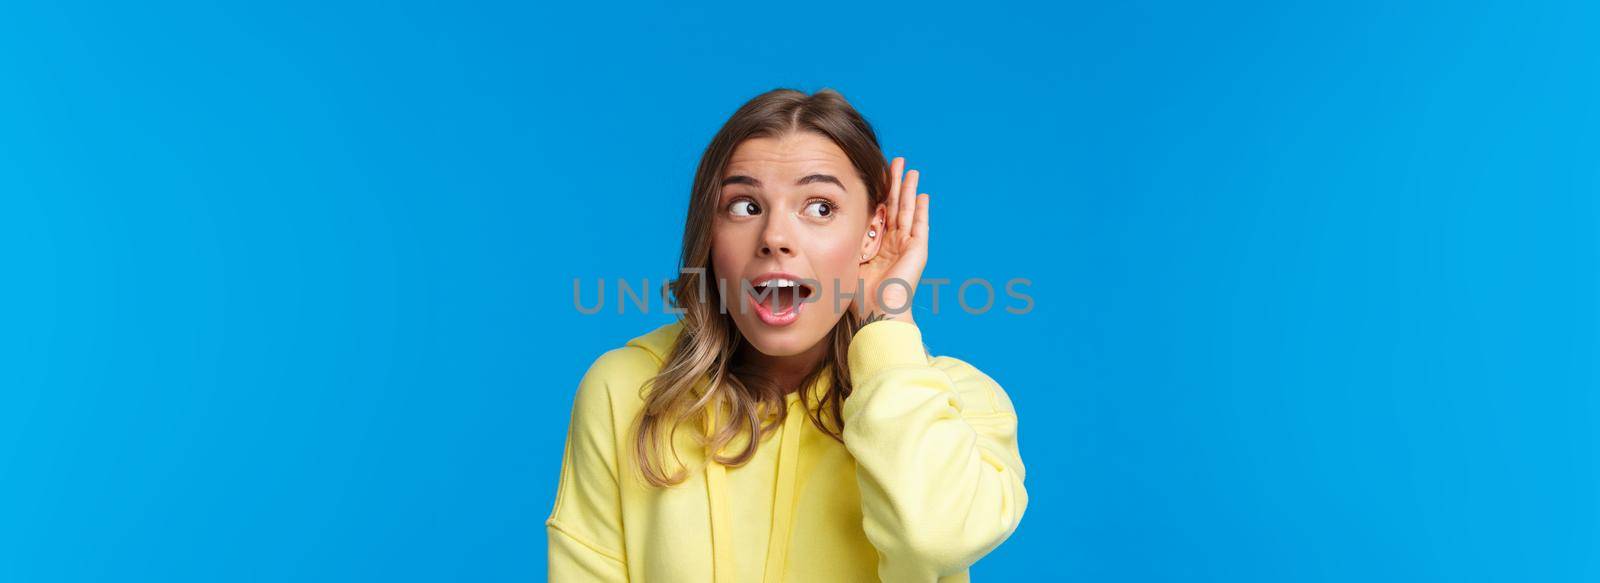 Close-up portrait of intrigued and curious blond young girl with pierced ear, gossiping, eavesdropping and listening to someone conversation interested, standing blue background. Copy space